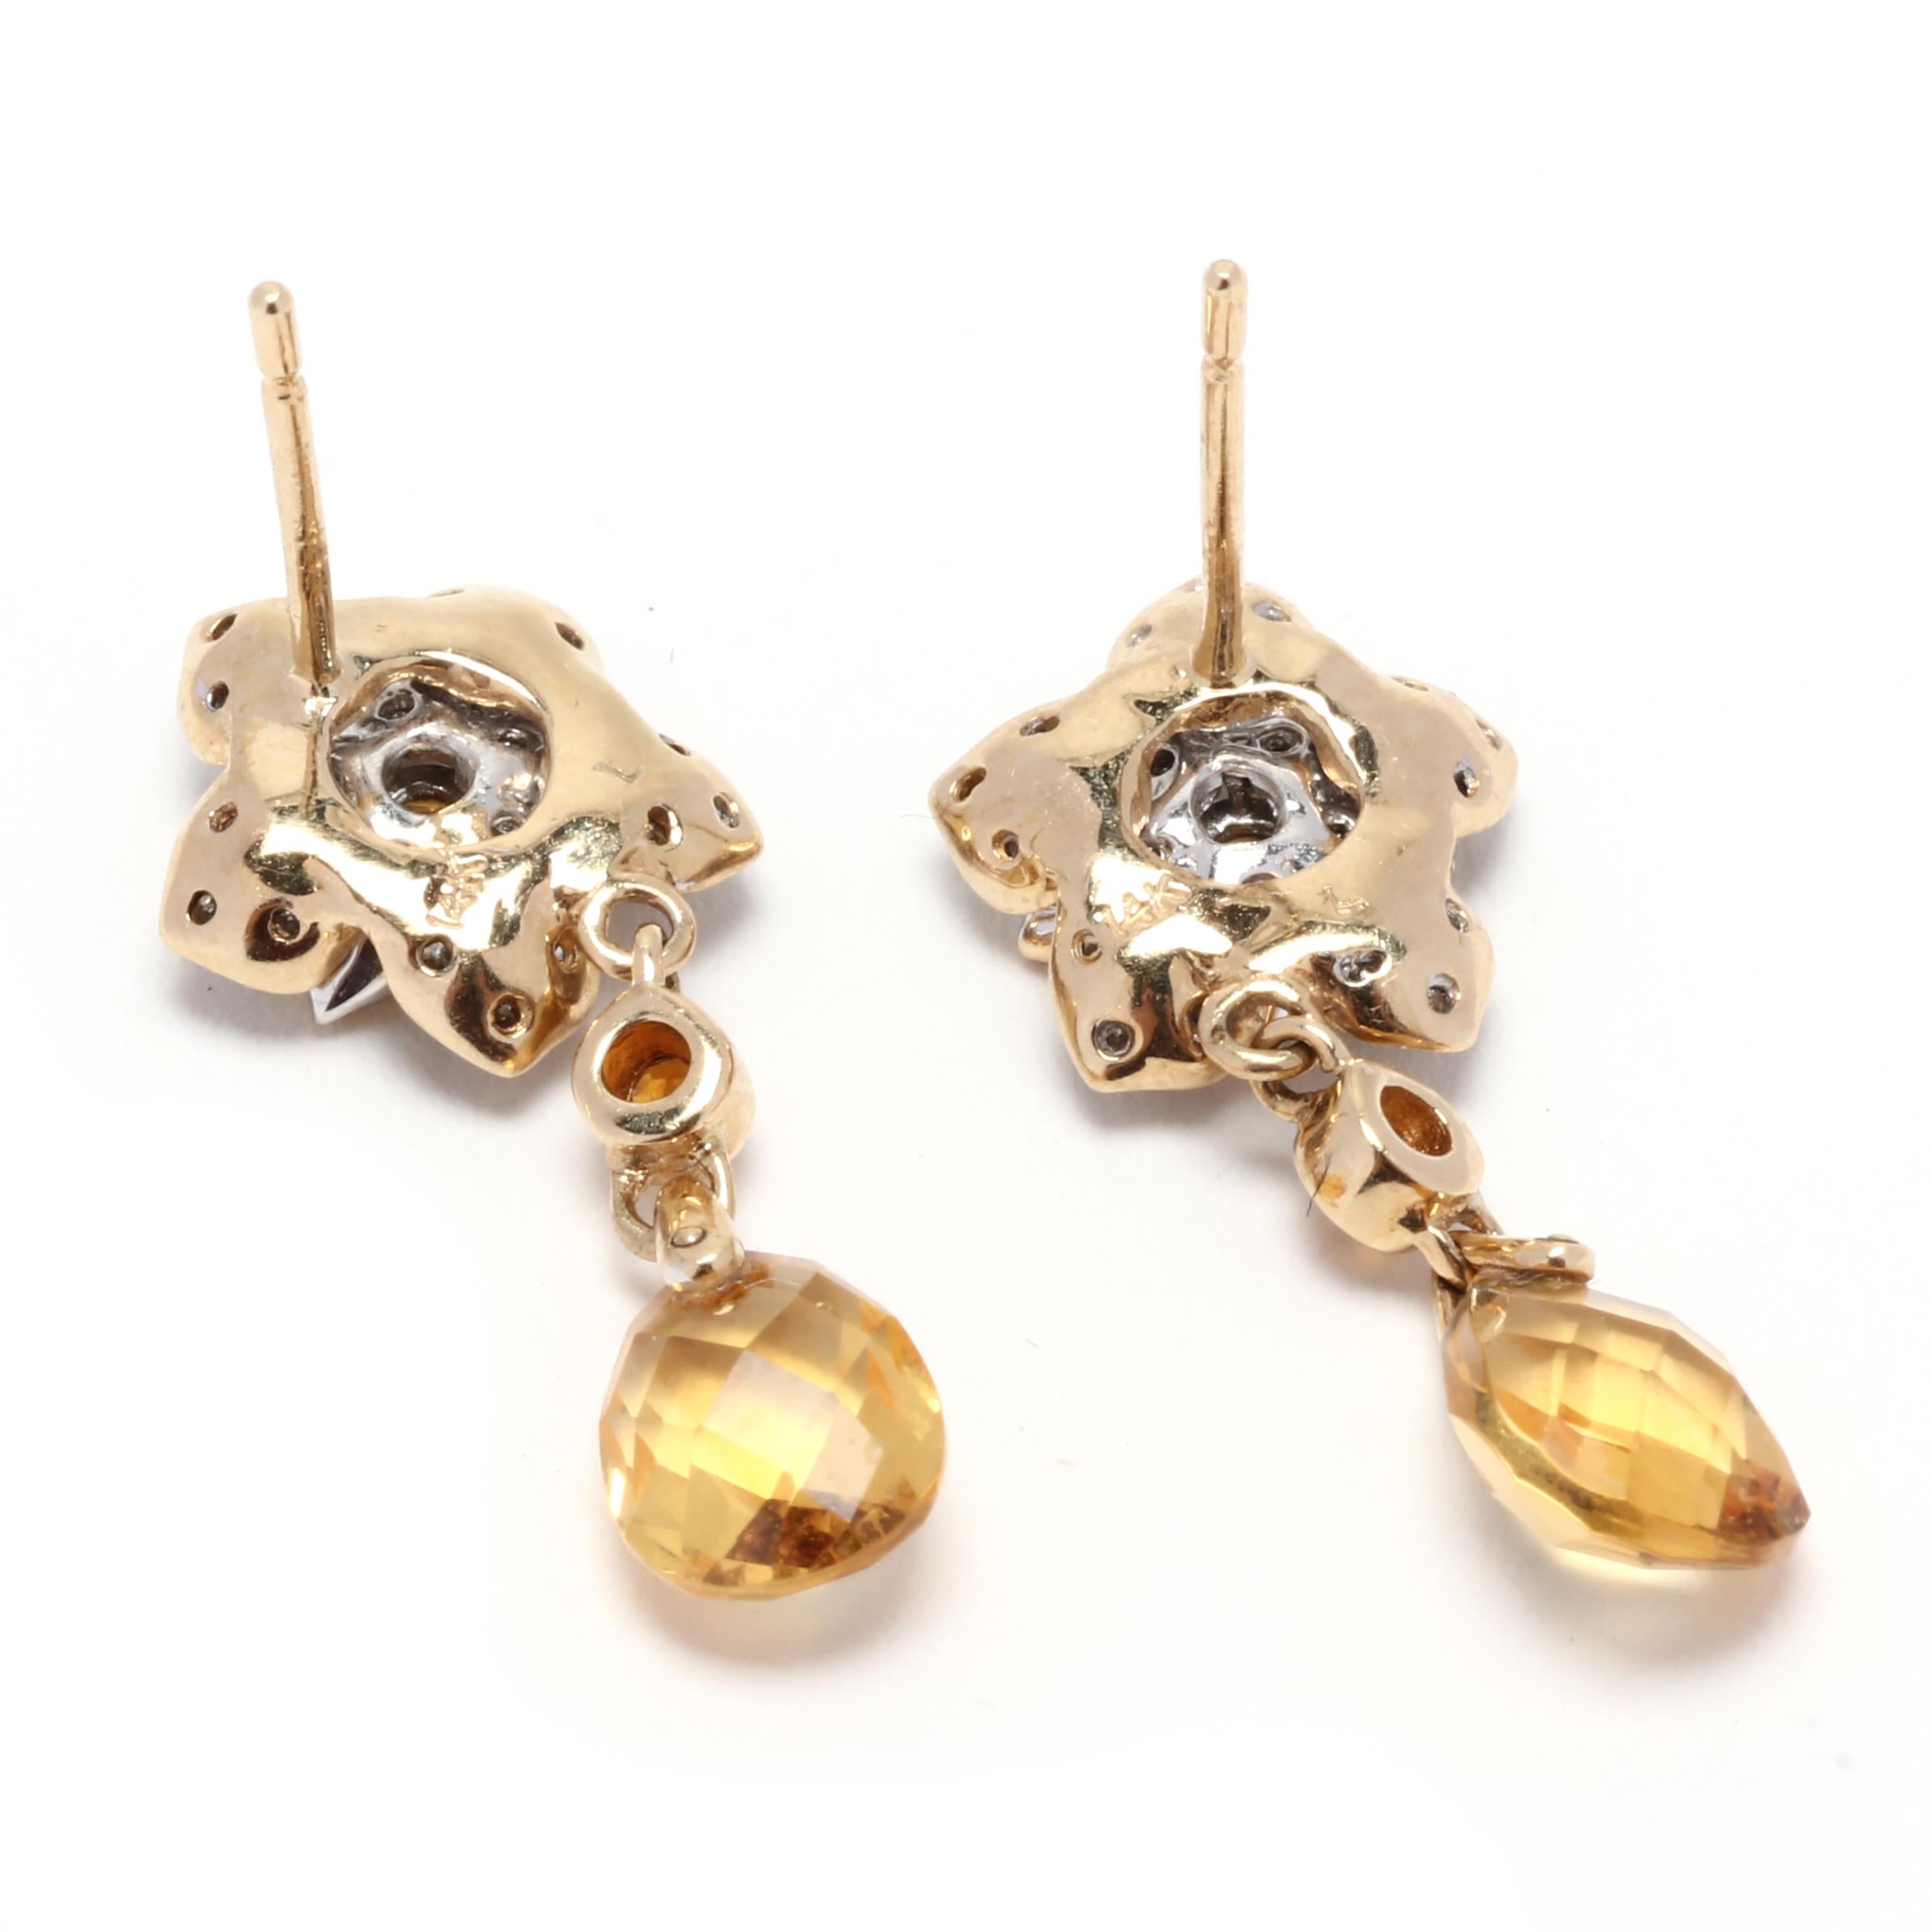 These Citrine Diamond Flower Dangle Earrings are a stunning and unique addition to any jewelry collection. Made with 14K yellow gold, these earrings feature a beautiful flower design with a vibrant citrine gemstone at the center. The citrine